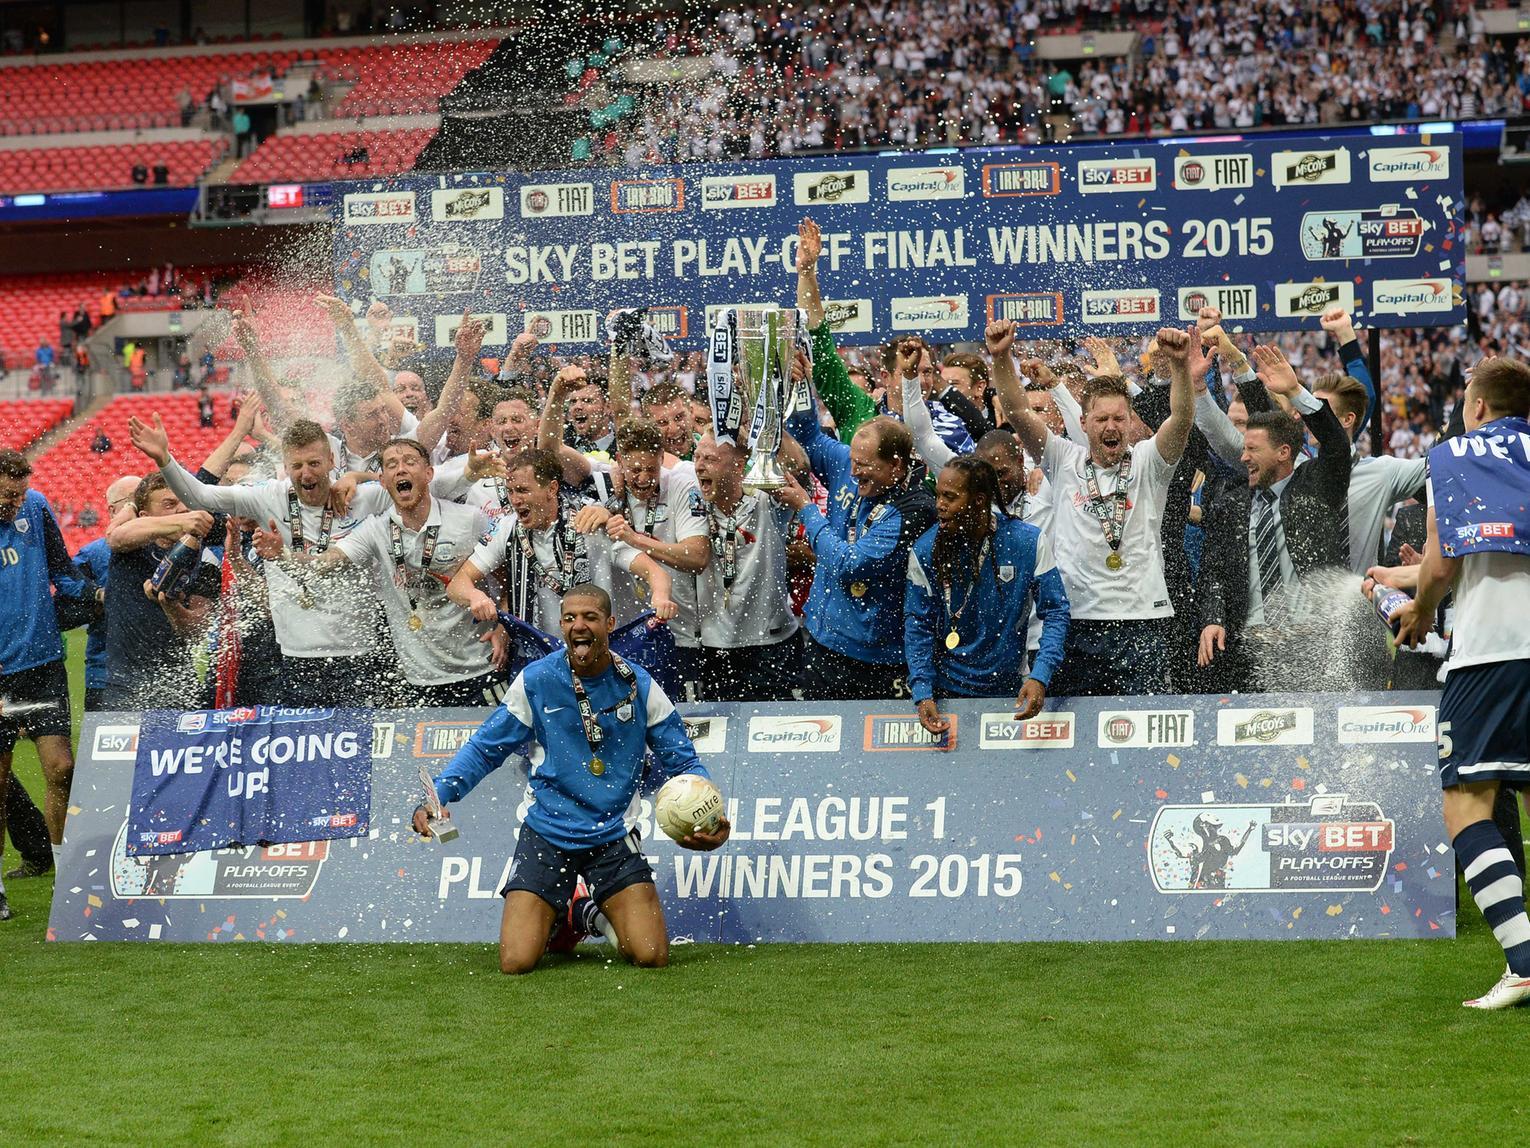 Preston North End celebrate ending the play-off curse, winning the League One play-off final at Wembley in 2015.